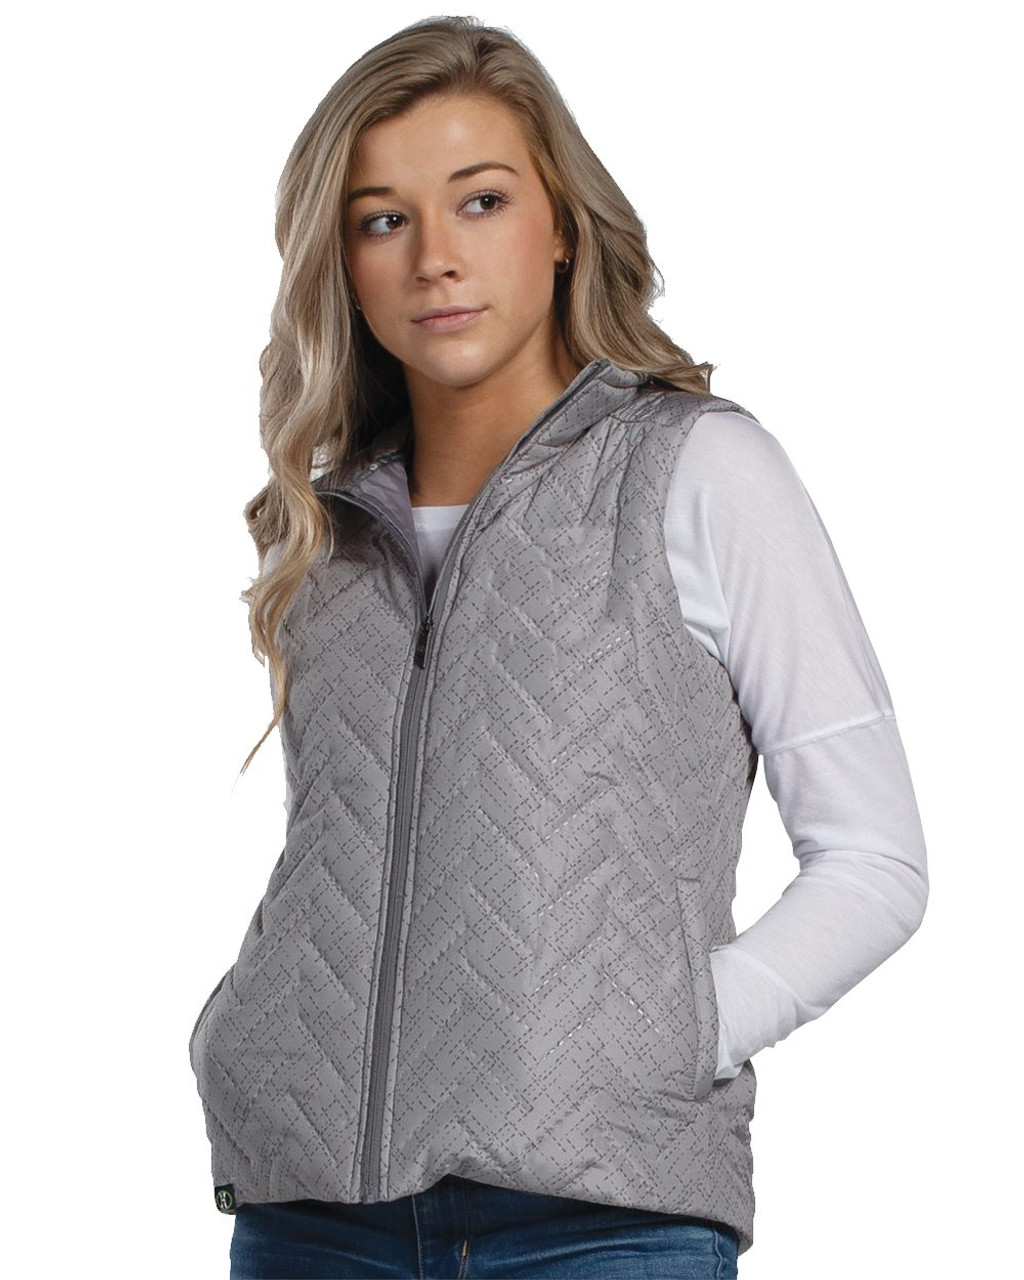 Embroidered Women's Repreve® Eco Quilted Vest - 229713